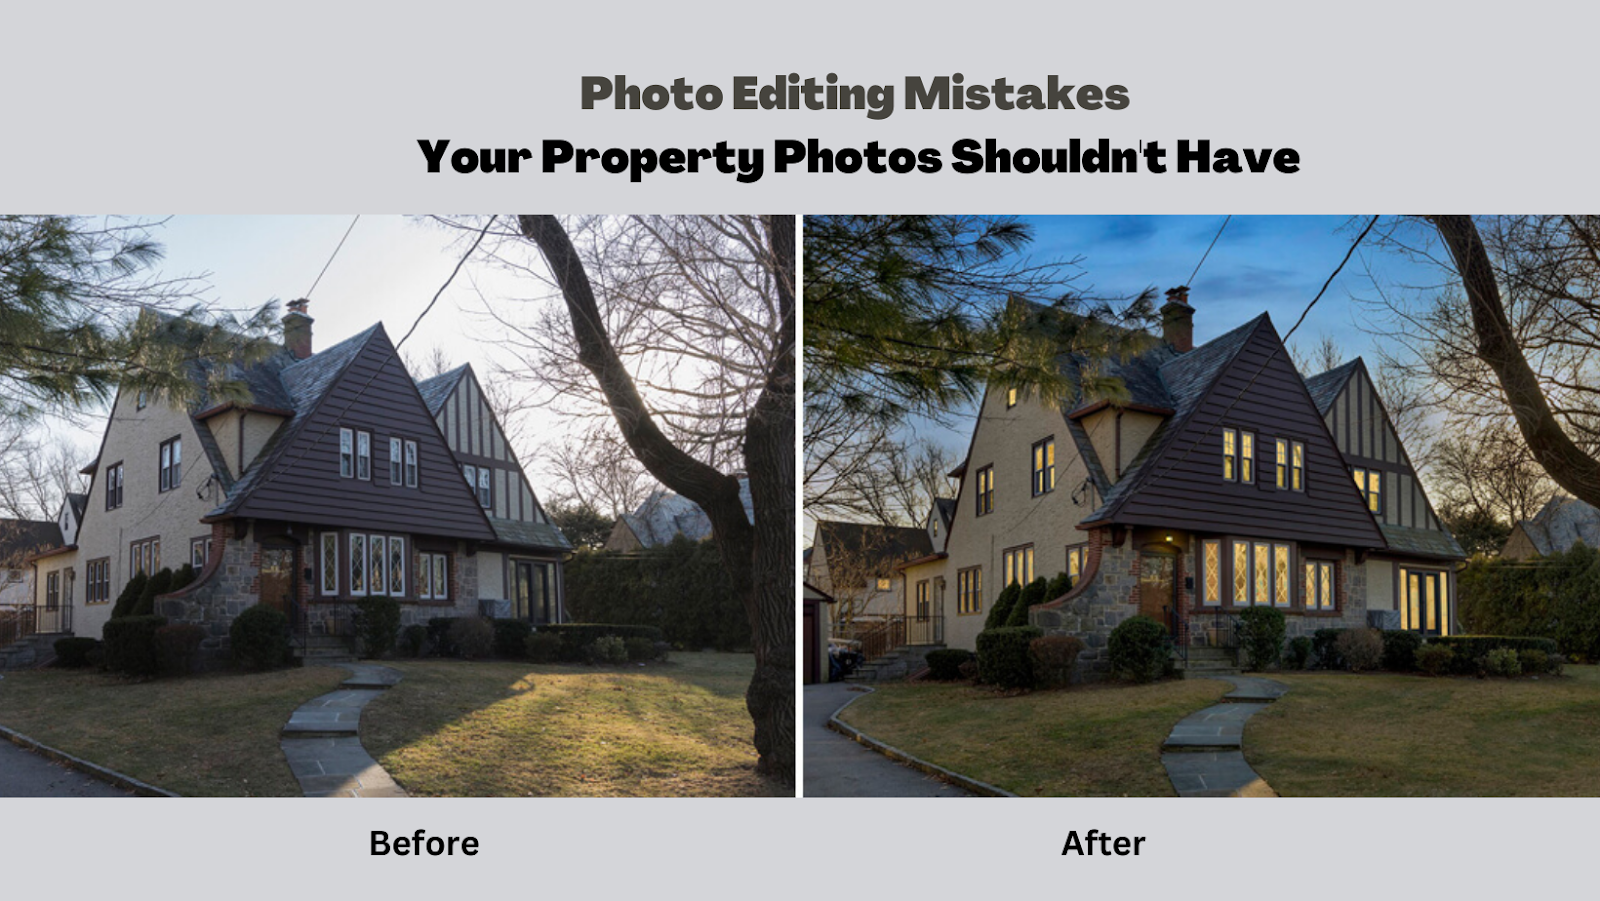 Top 5 Photo Editing Mistakes Your Property Photos Shouldn’t Have